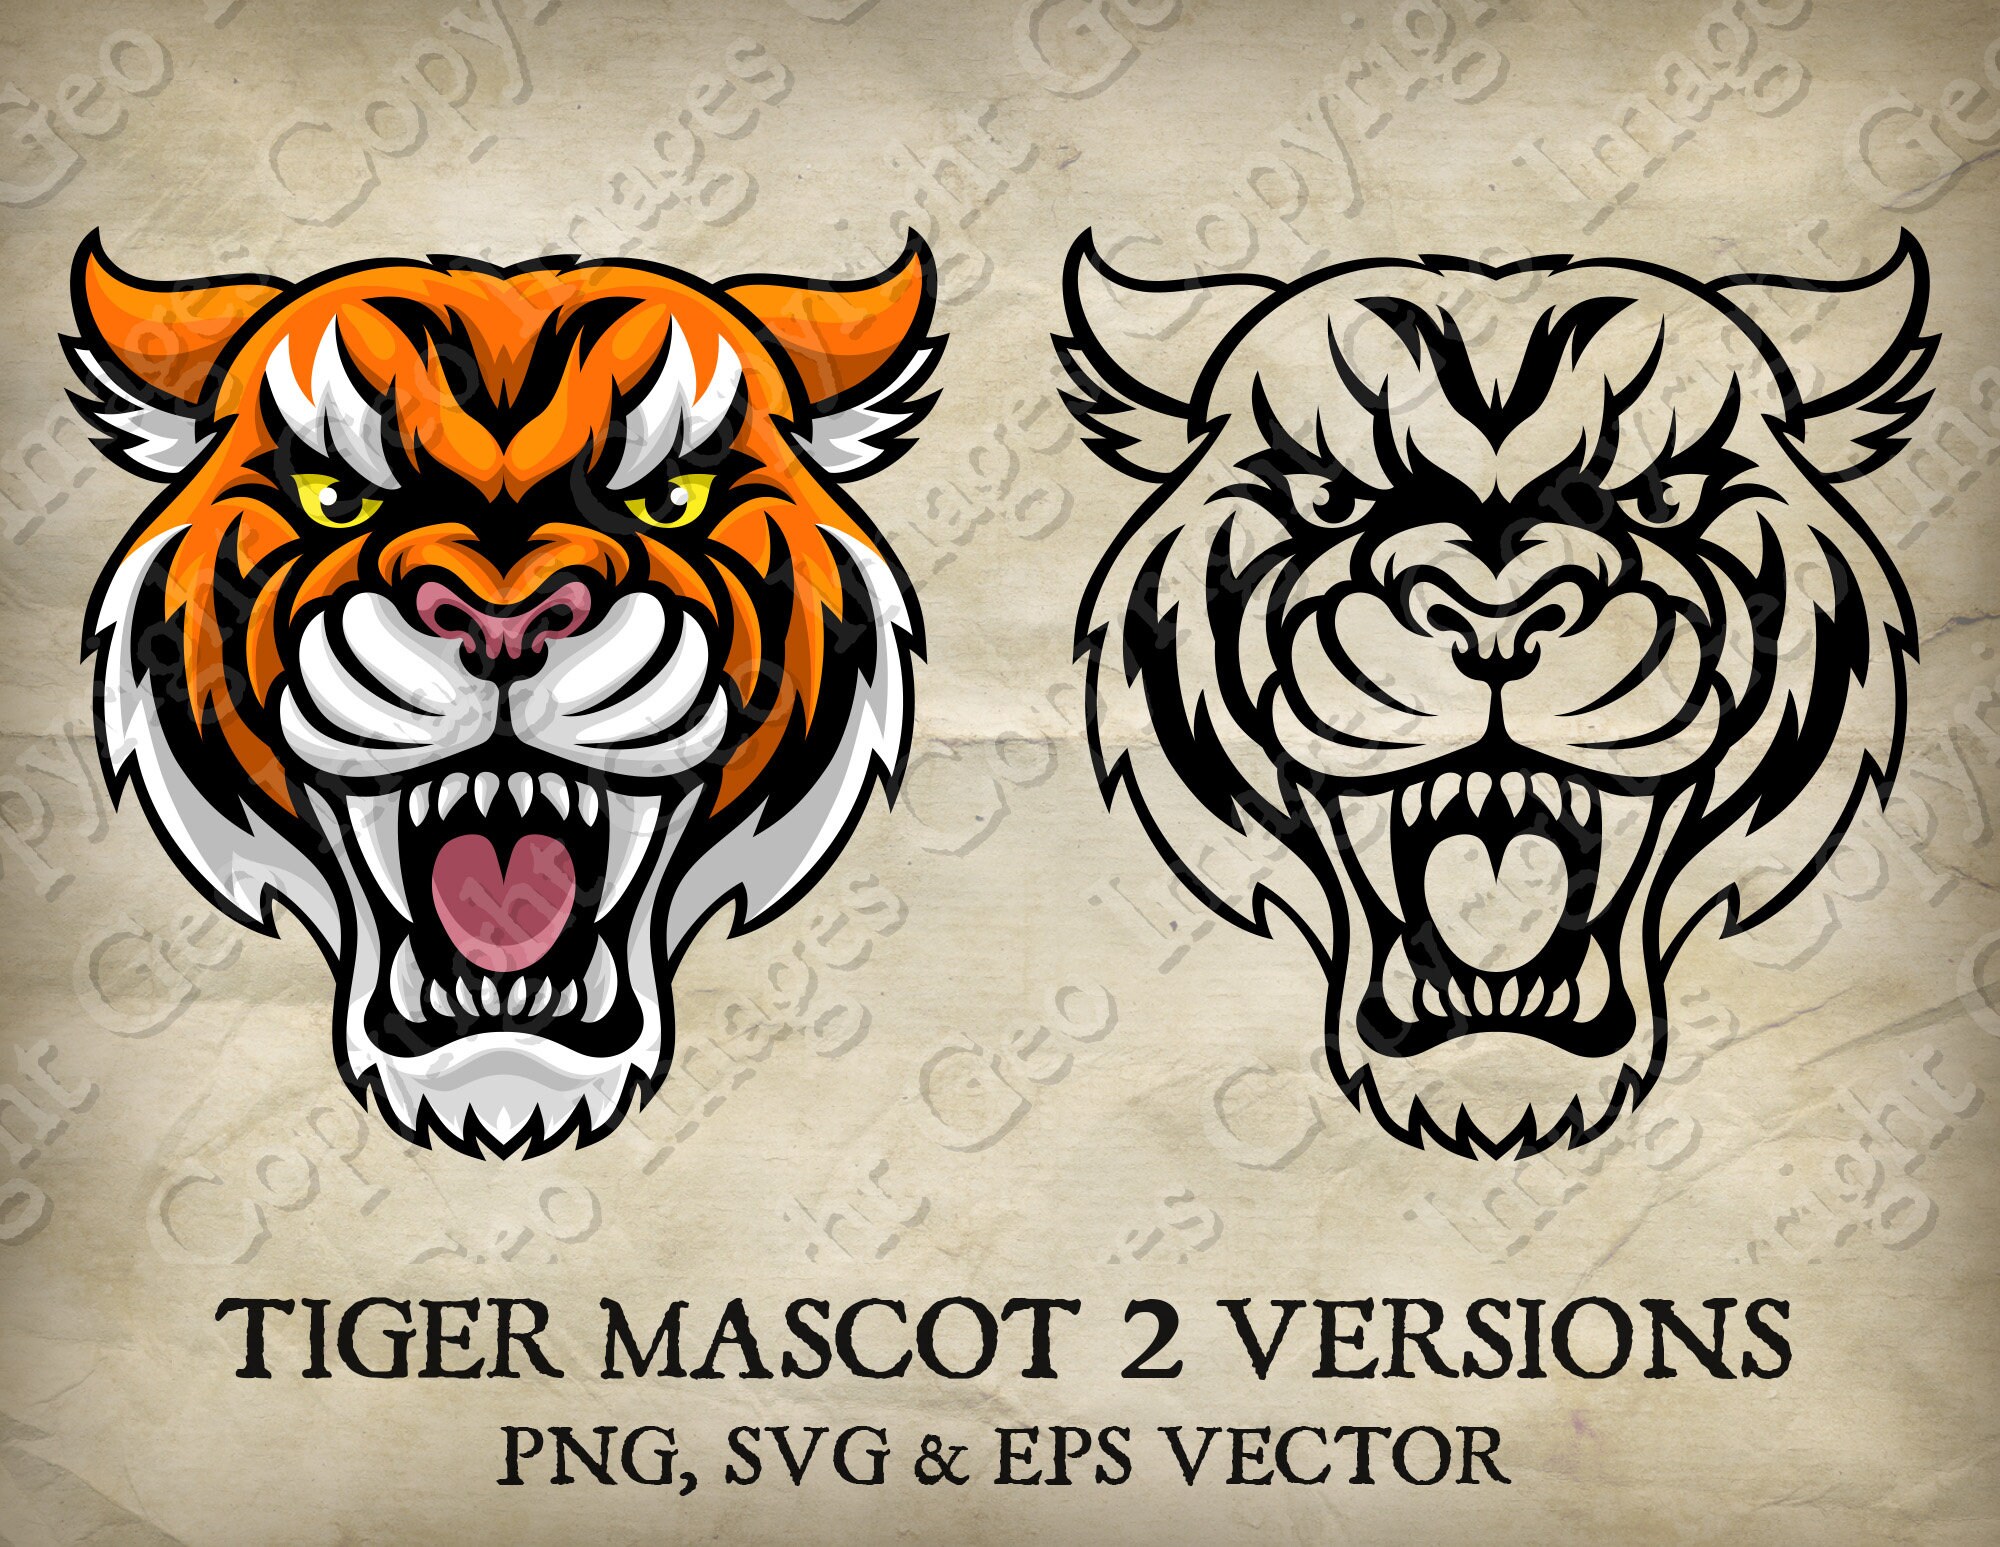 Tiger Cat Mascot Head Angry Tigers Mascot Face Cartoon in Two Versions  Artwork. Vector SVG, EPS, Transparent Background PNG and Jpeg Clipart 